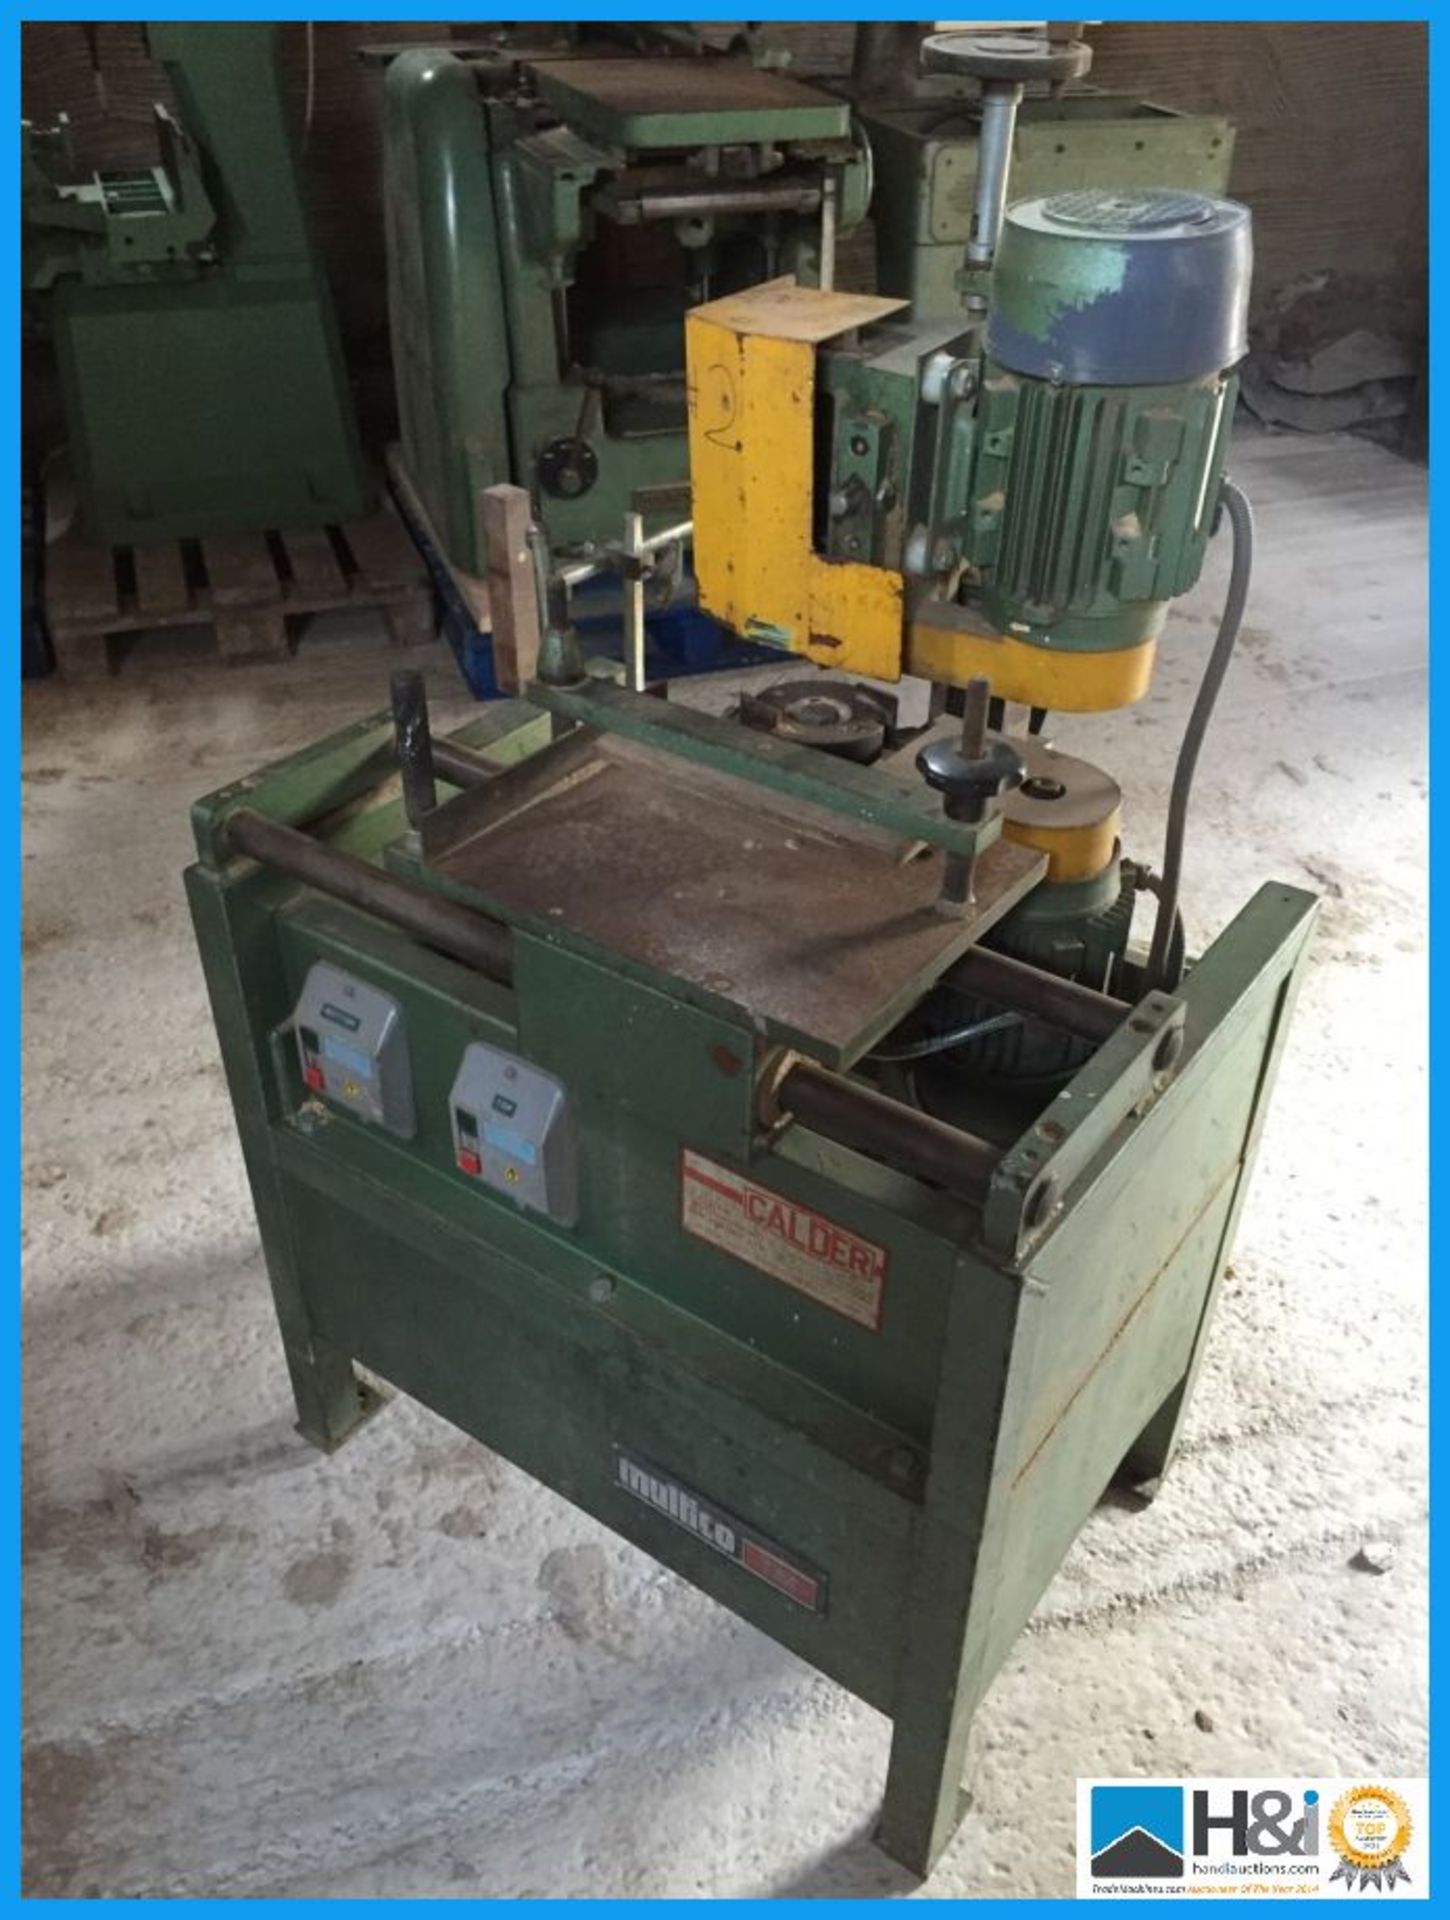 Compact Multico TM3 two head tenoner with cutter blocks. 3 phase. Appraisal: Viewing Essential